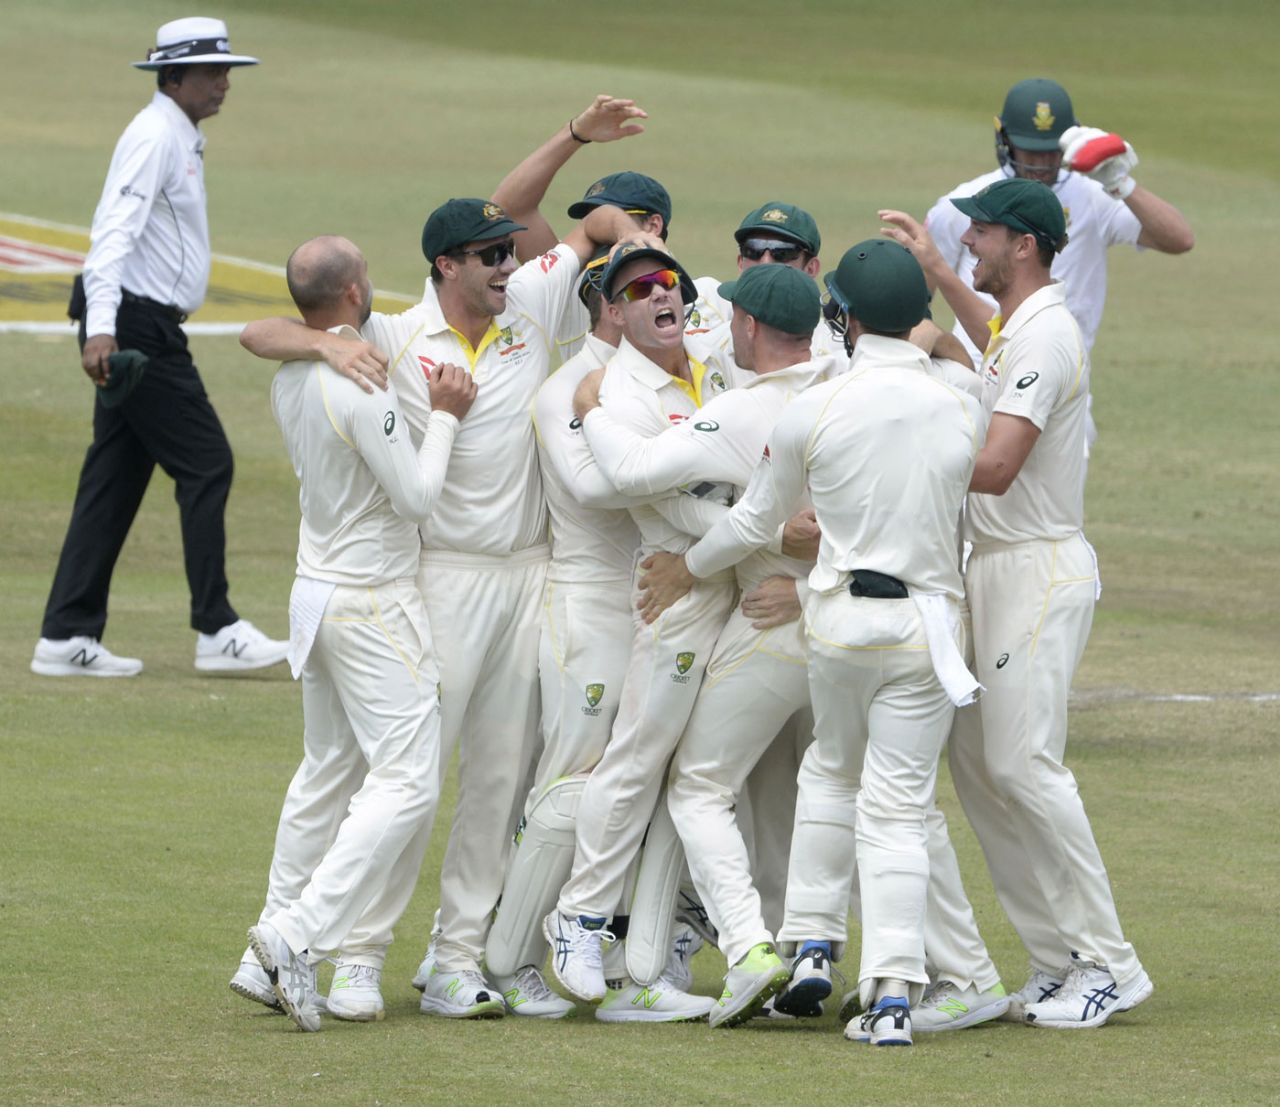 David Warner is engulfed after helping to run out AB de Villiers, South Africa v Australia, 1st Test, Durban, 4th day, March 4, 2018